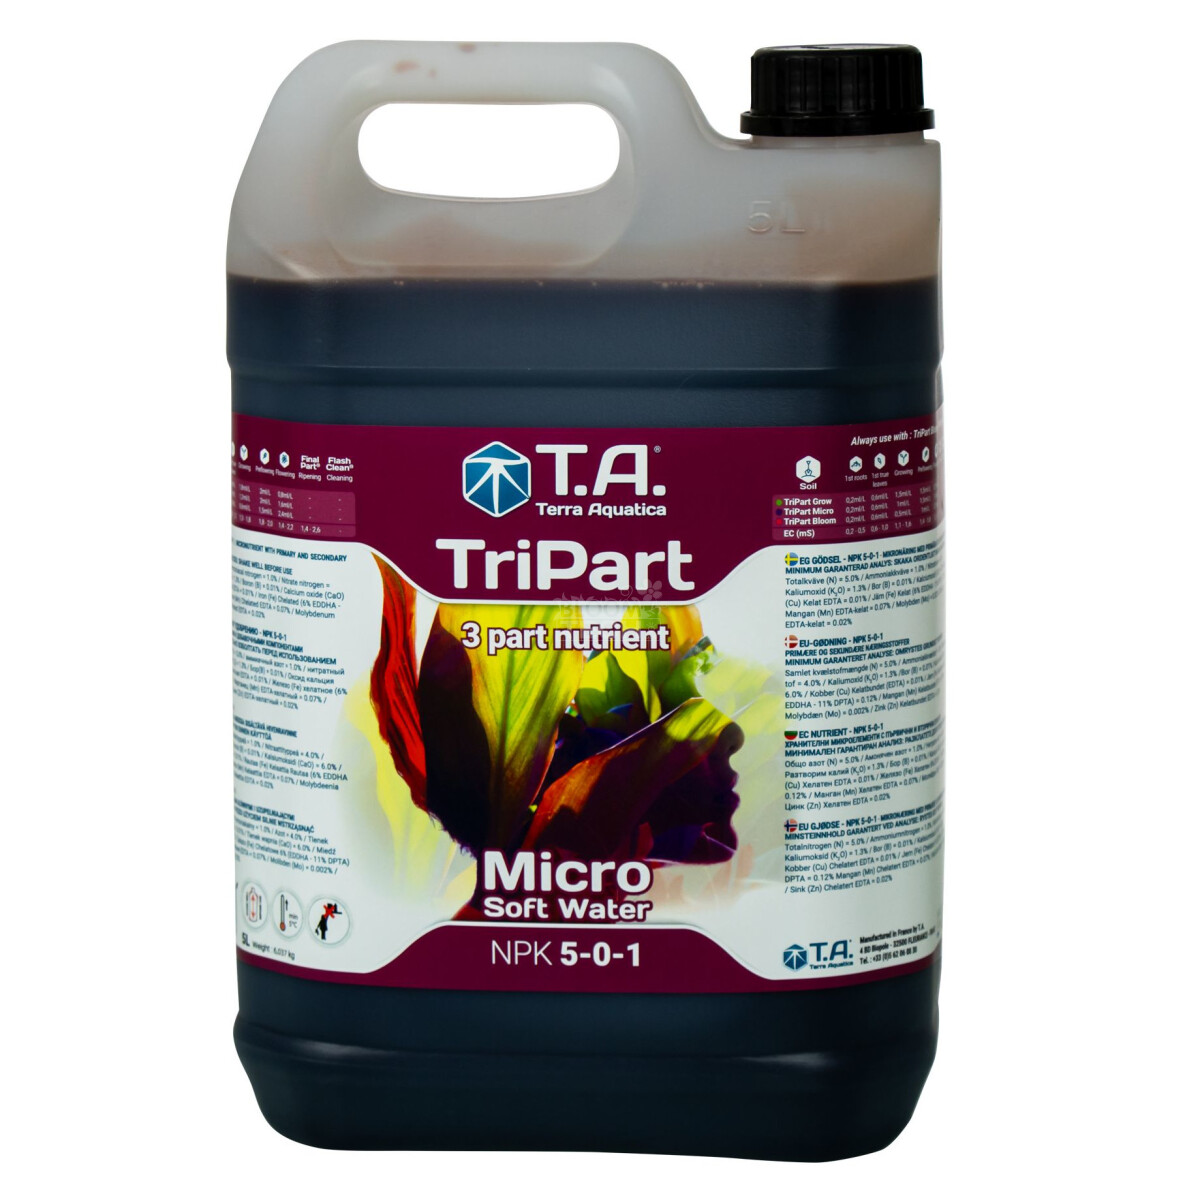 T.A. Micro 5 - 44,90 TriPart Softwater Bloomtech, Liter €